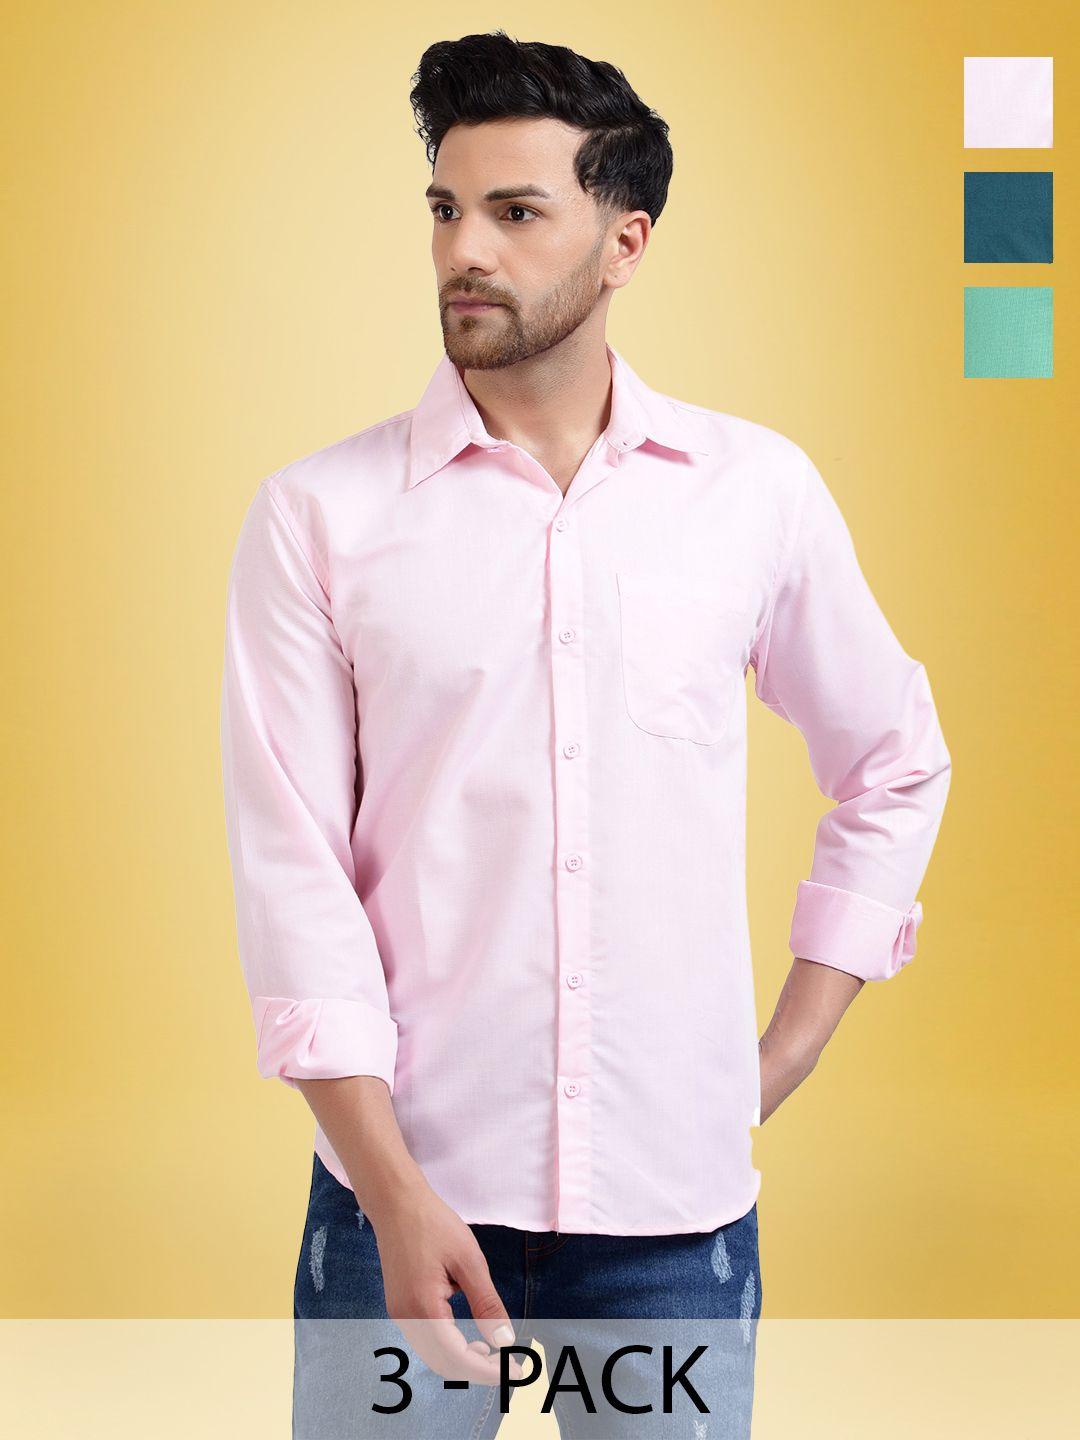 1 stop fashion selection of 3 standard spread collar chest pocket cotton casual shirt